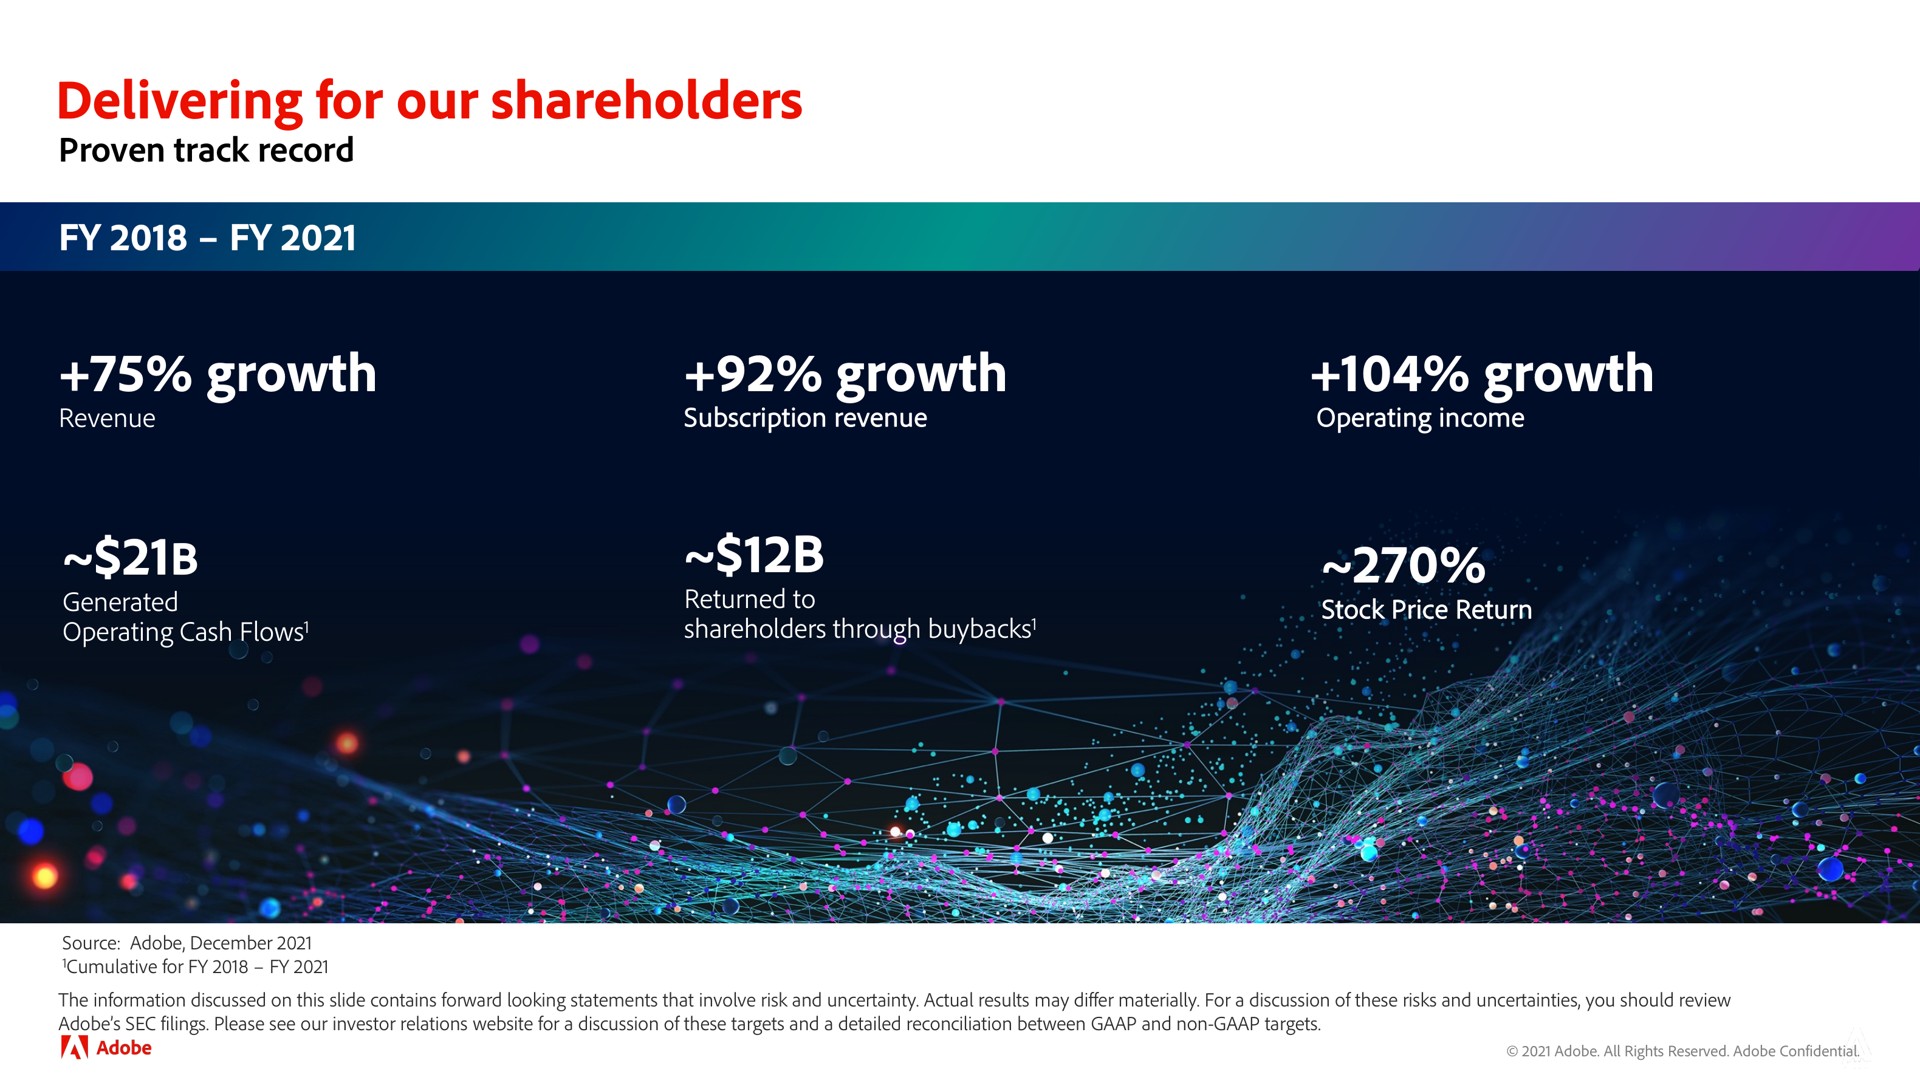 delivering for our shareholders growth growth growth pee | Adobe